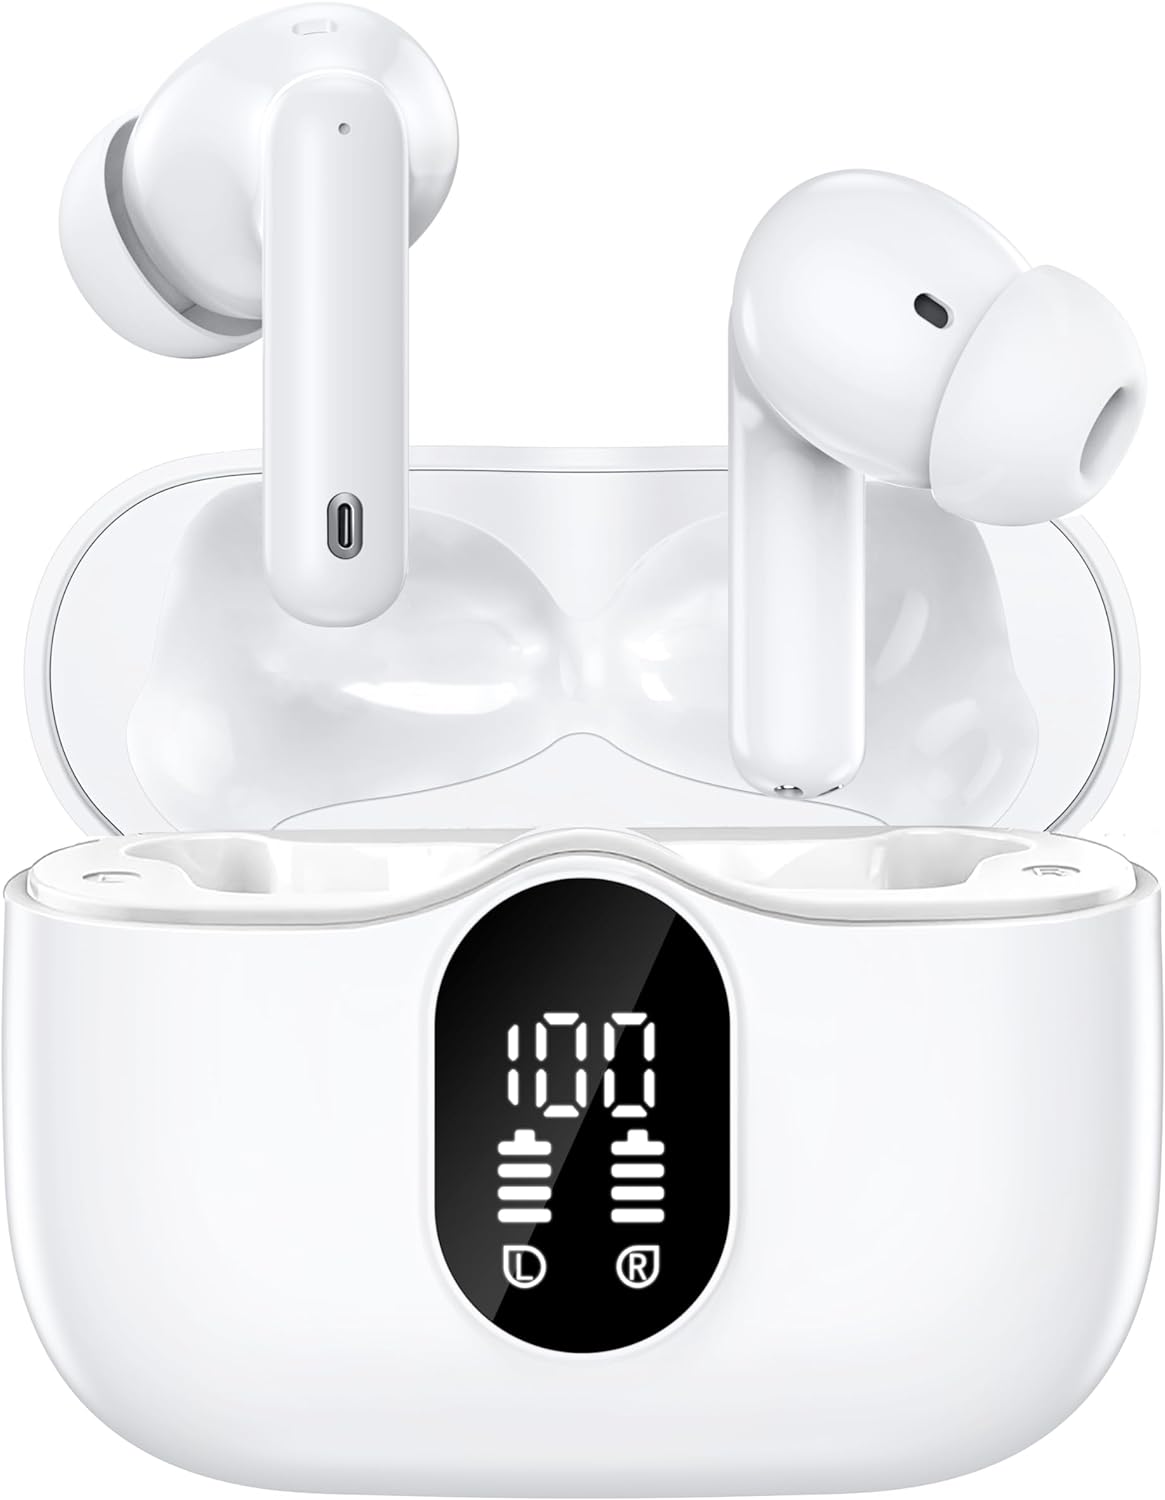 Earbuds Wireless Bluetooth 5.3 Headphones Ear Buds Active Noise Cancelling Earbuds Hi-Fi Stereo LED Power Display Earphones with Charging Case Ear Pods Buds for iPhone Android (White)